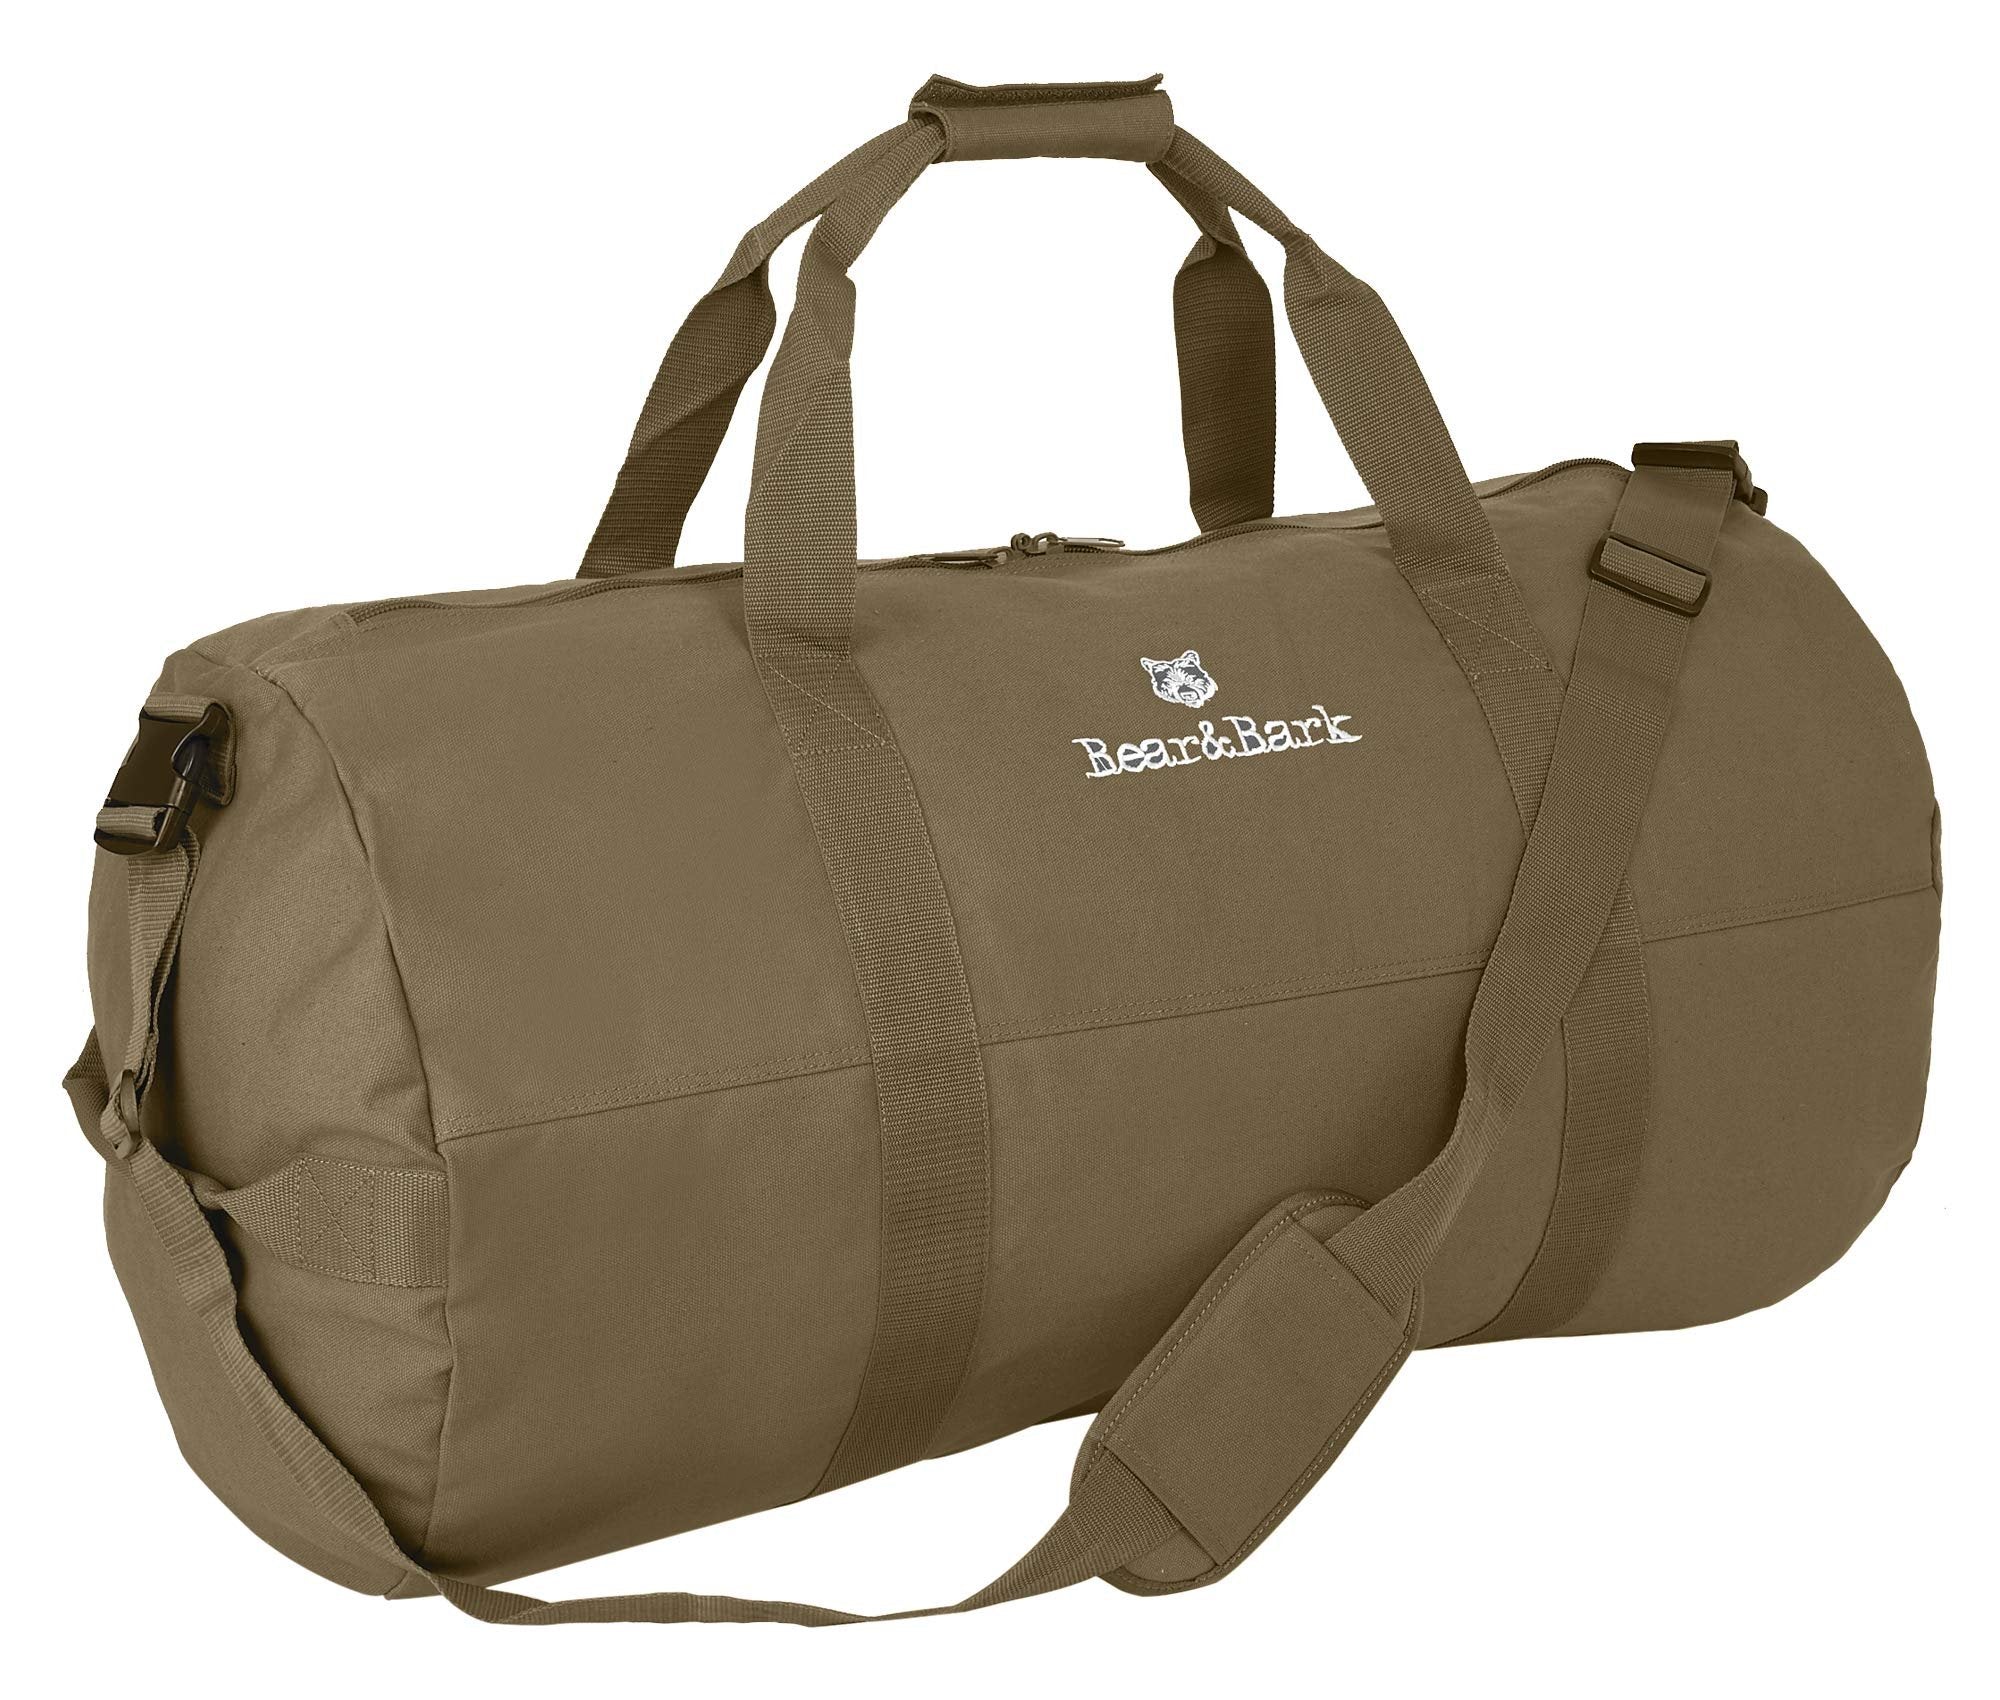 Large Duffle Bag - Military Green 32”x18” - 133.4L - Canvas Military and Army Cargo Style Travel Luggage - Carryall Duffle for Men and Women - Hiking, Student, Backpacking, Storage Shoulder Tote Bag